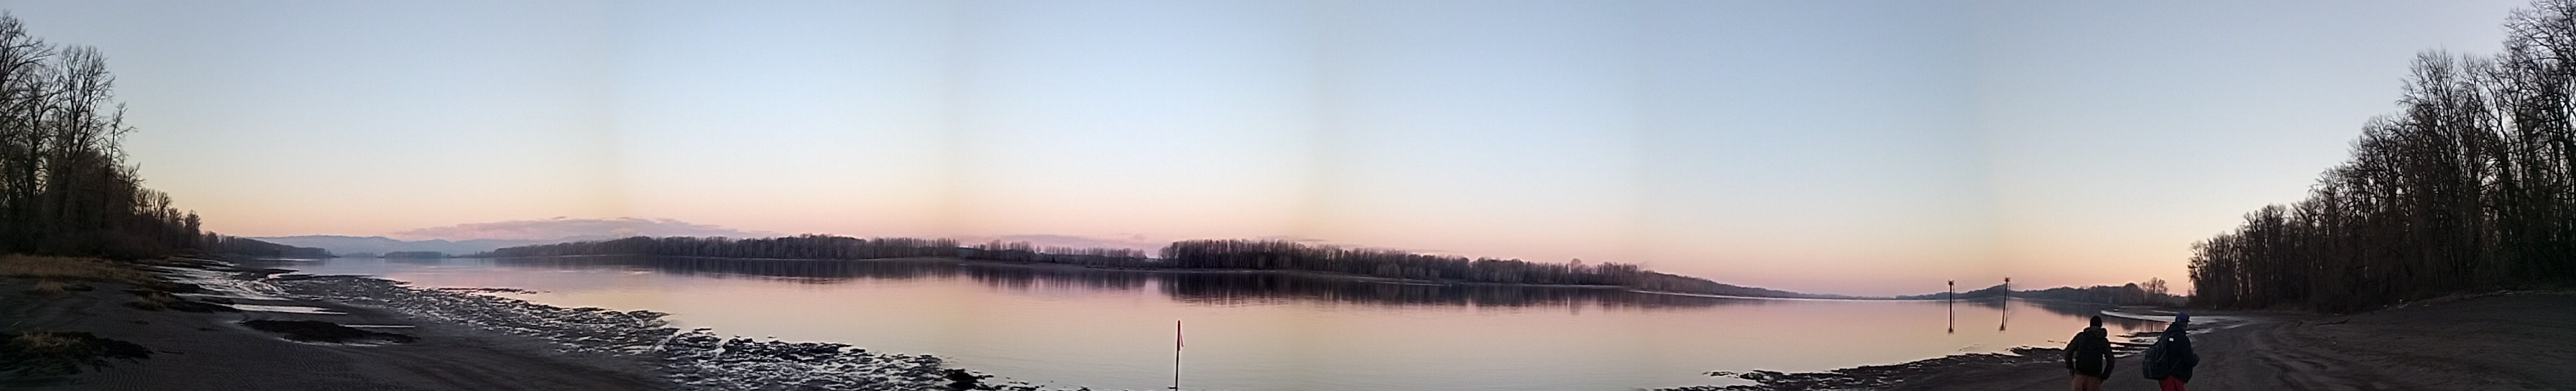 A Panoramic Photo taken from Sauvie Island, looking east across the Columbia River to Washington State, February 2022